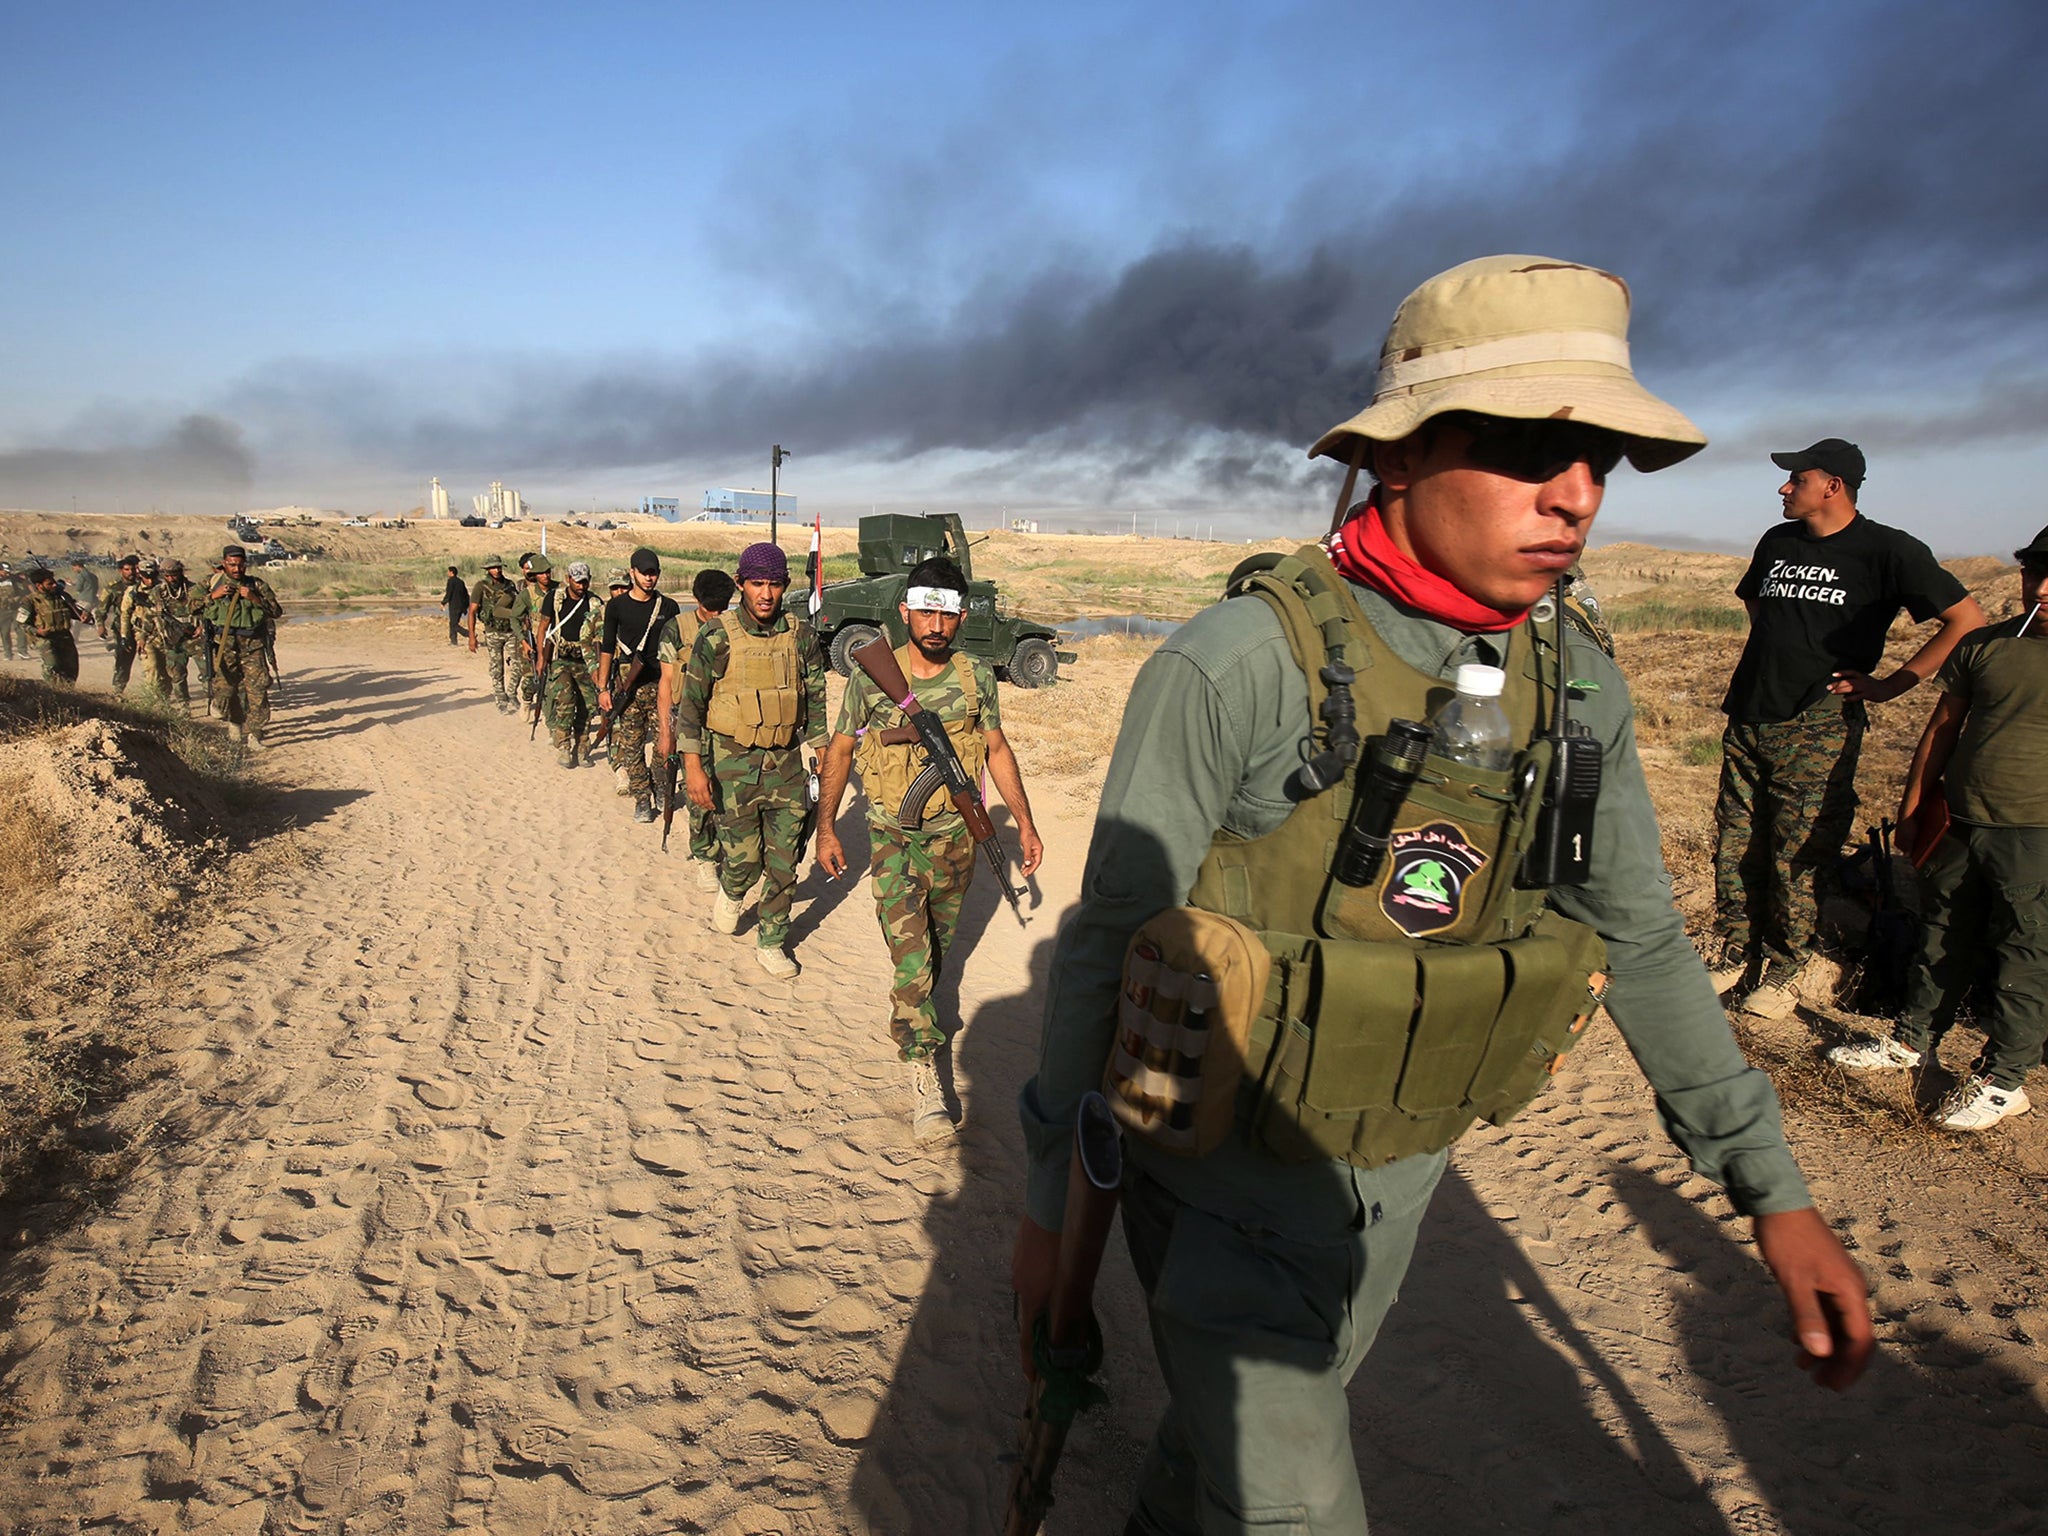 Soldiers advance toward Fallujah, the scene of deadly battles during the US occupation of Iraq